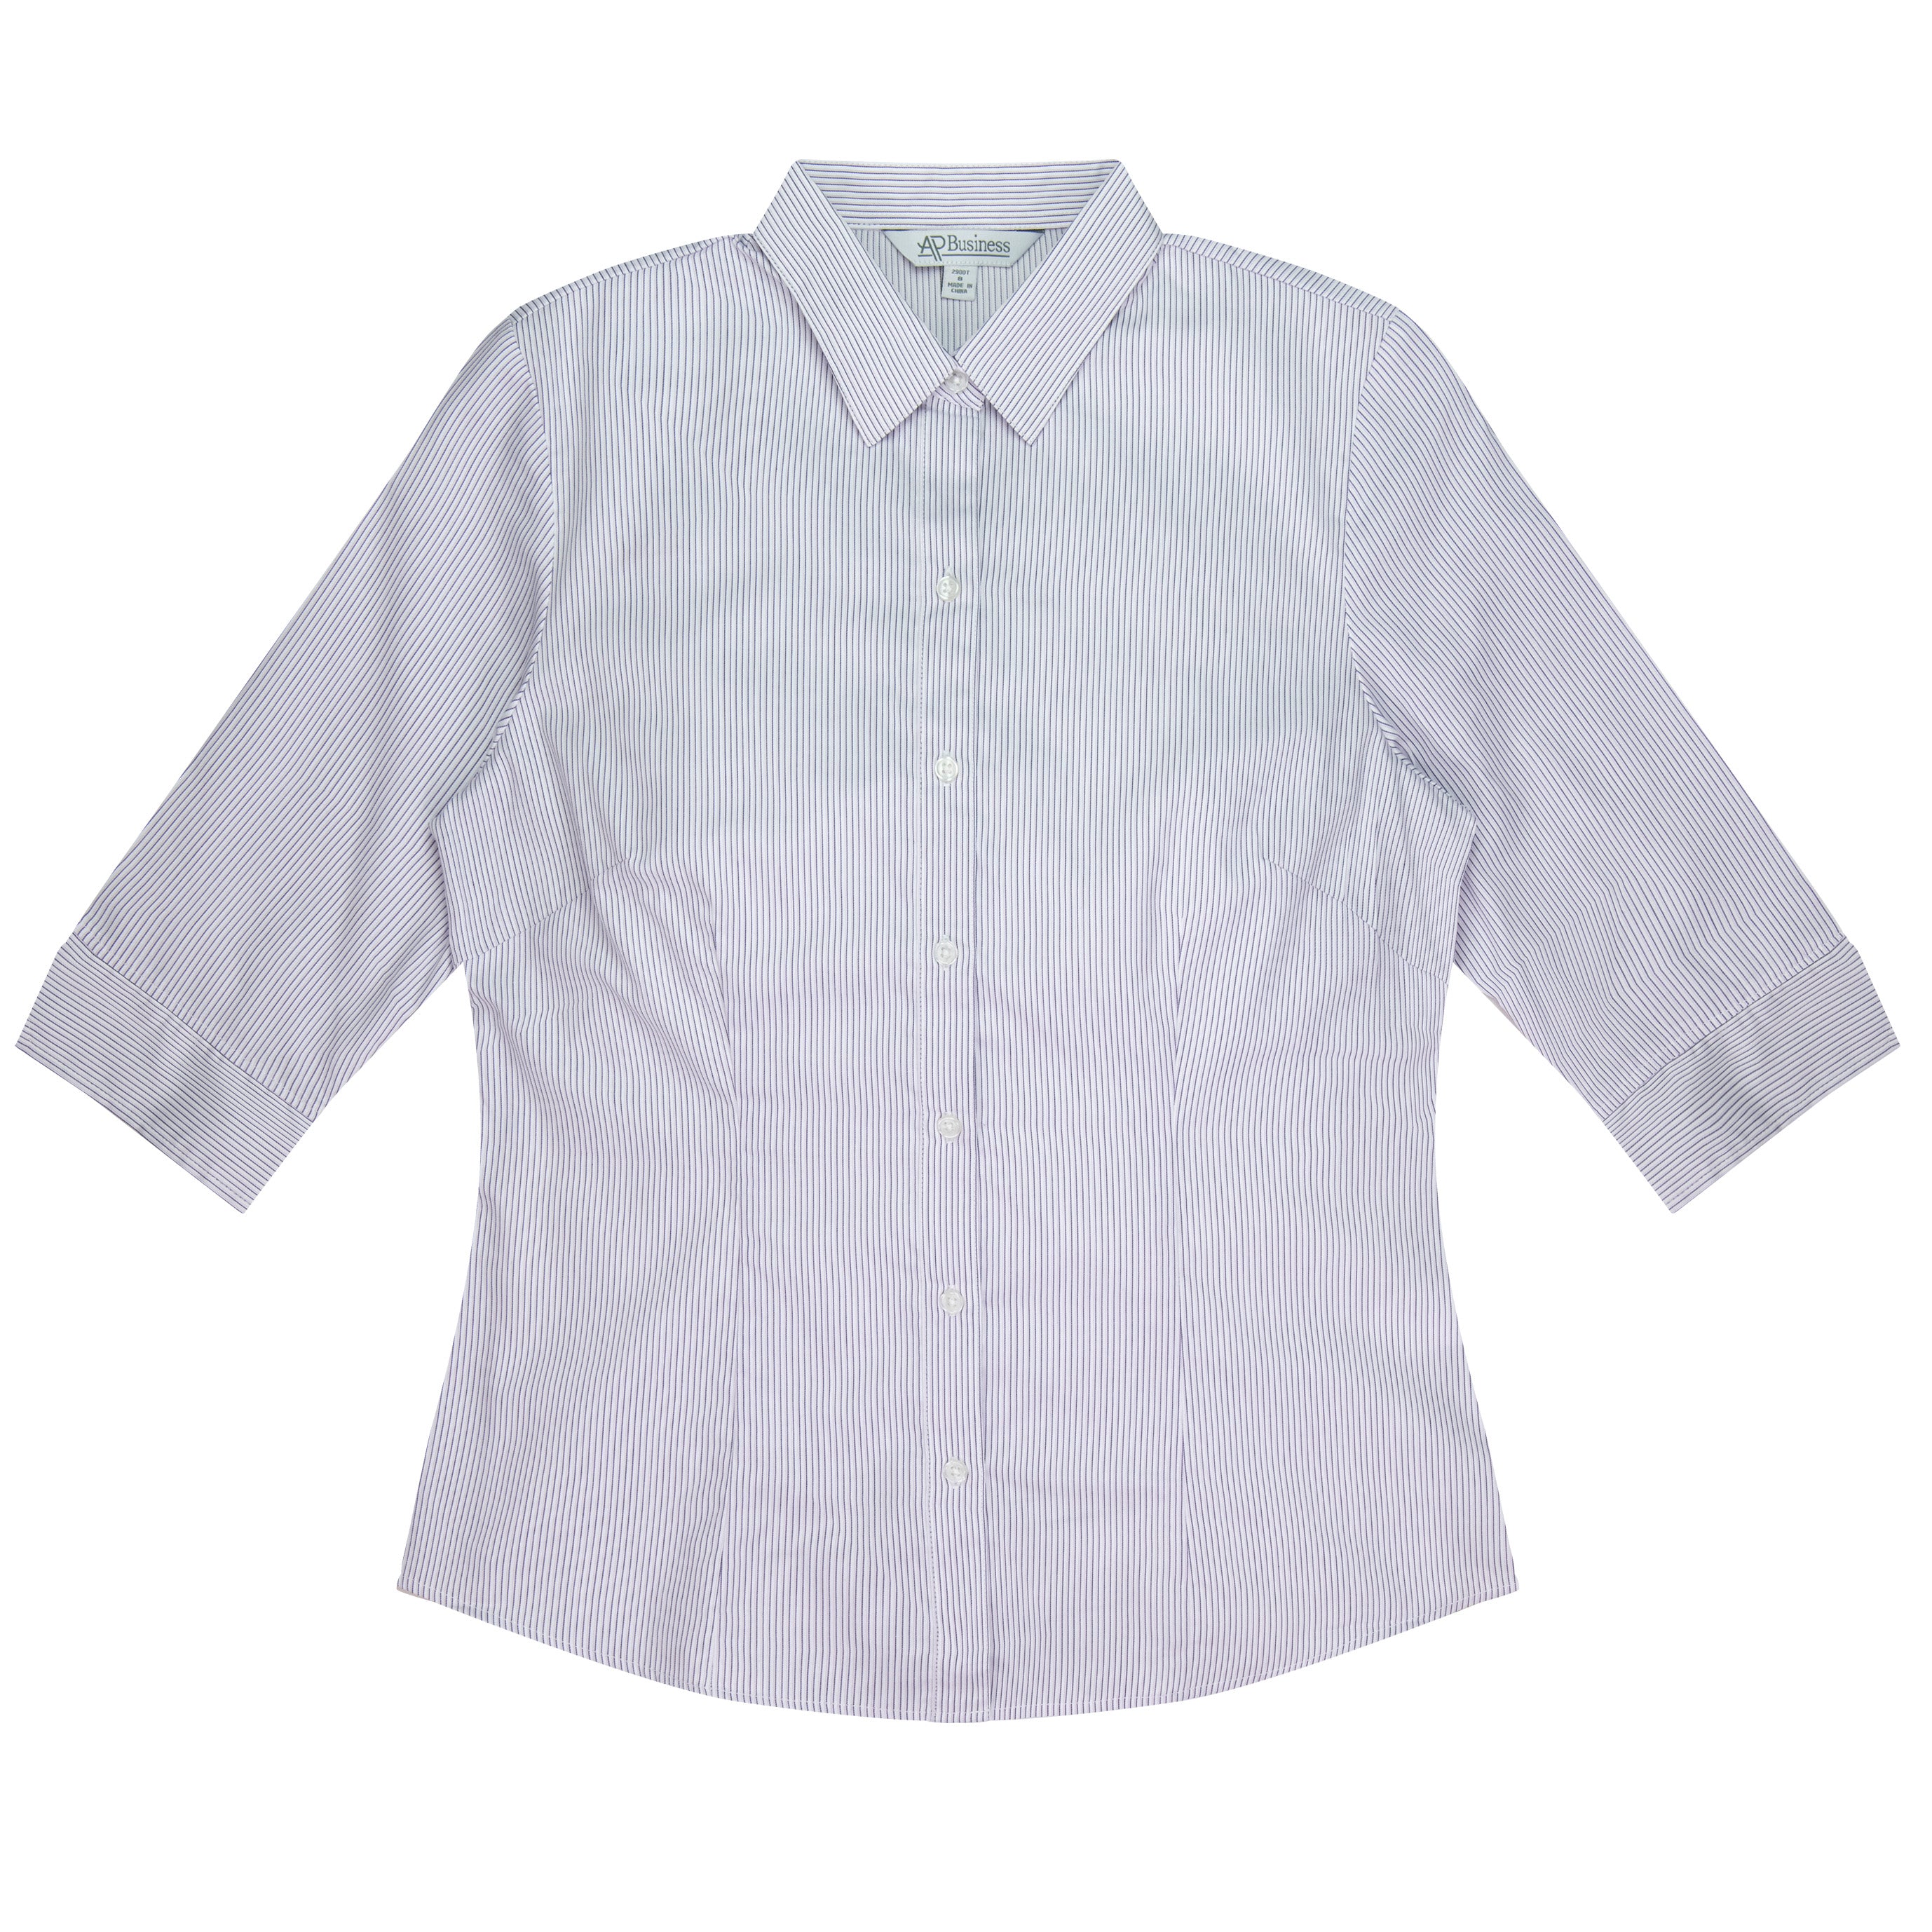 HENLEY LADY SHIRT 3/4 SLEEVE - 2900T-Aussie Pacific-4